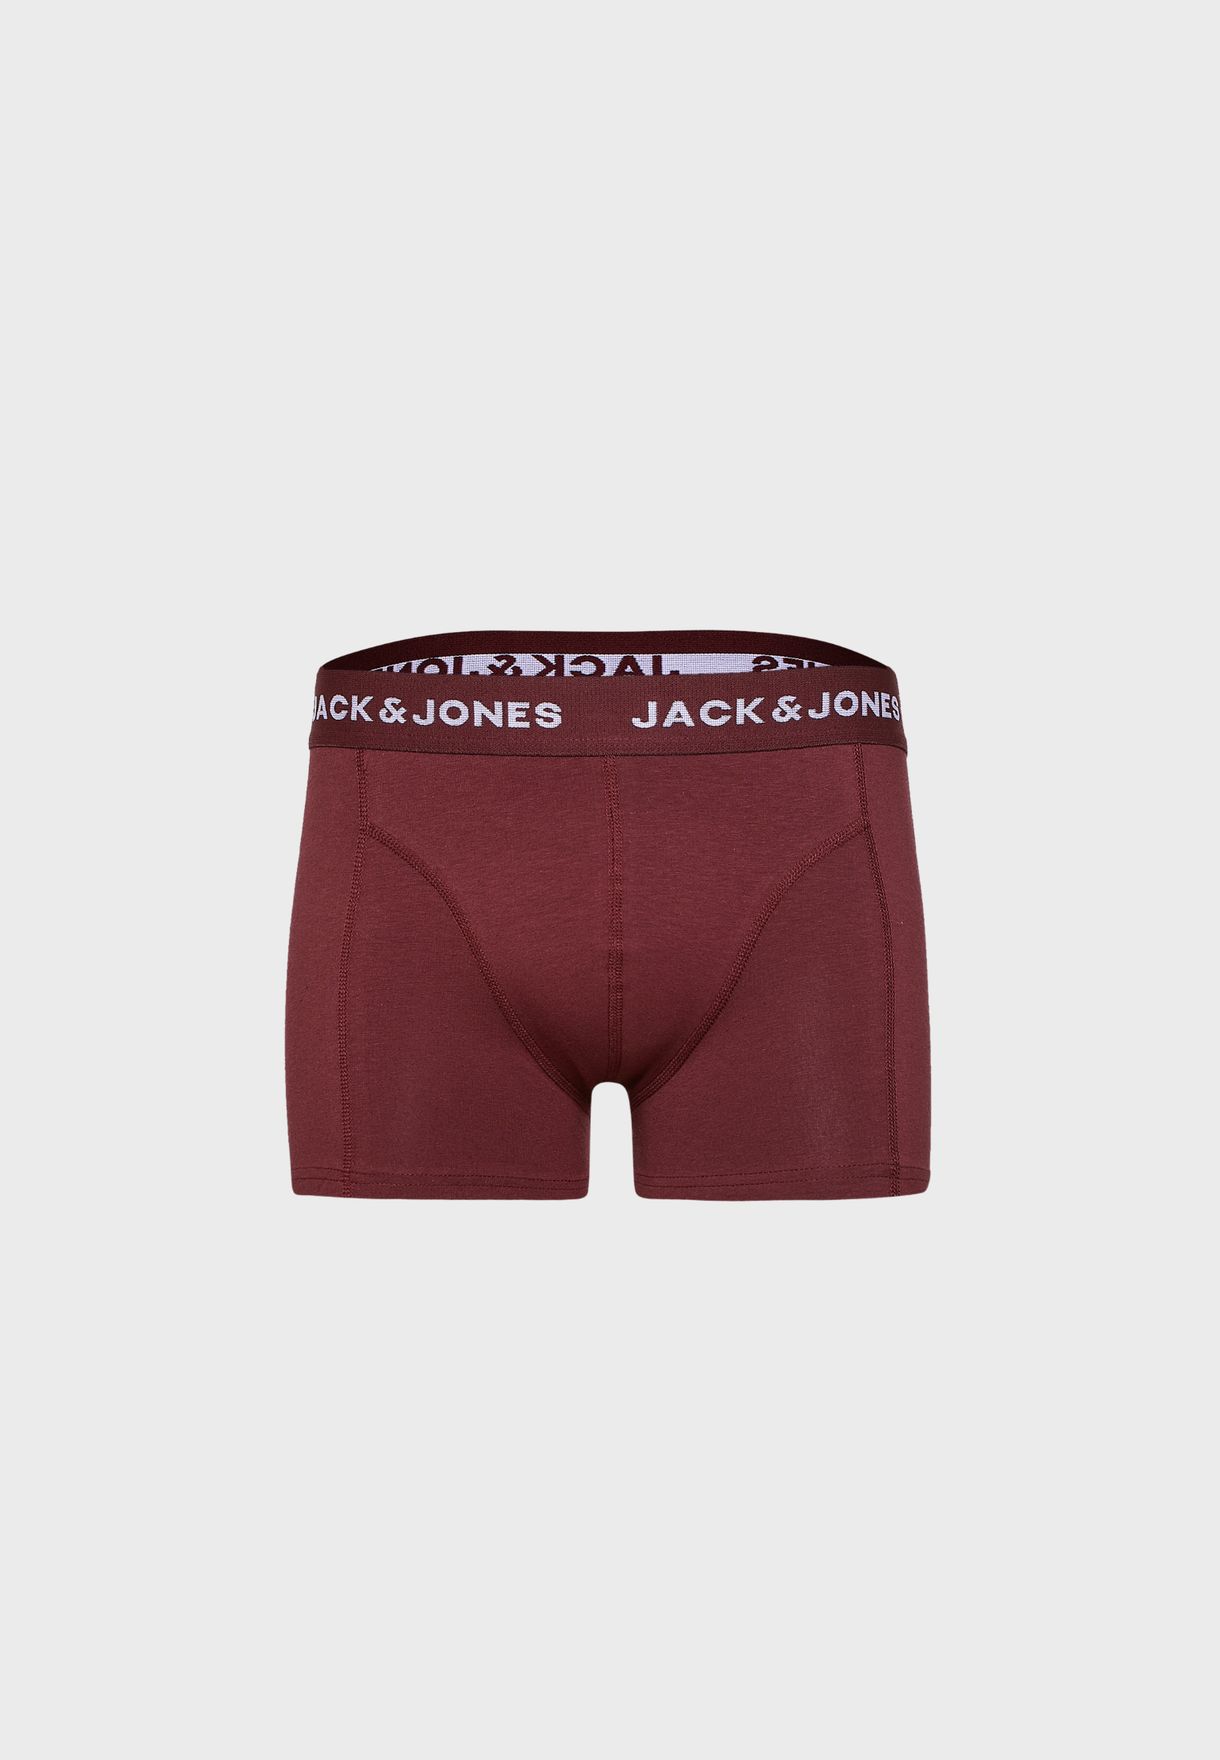 5 Pack Assorted Trunks